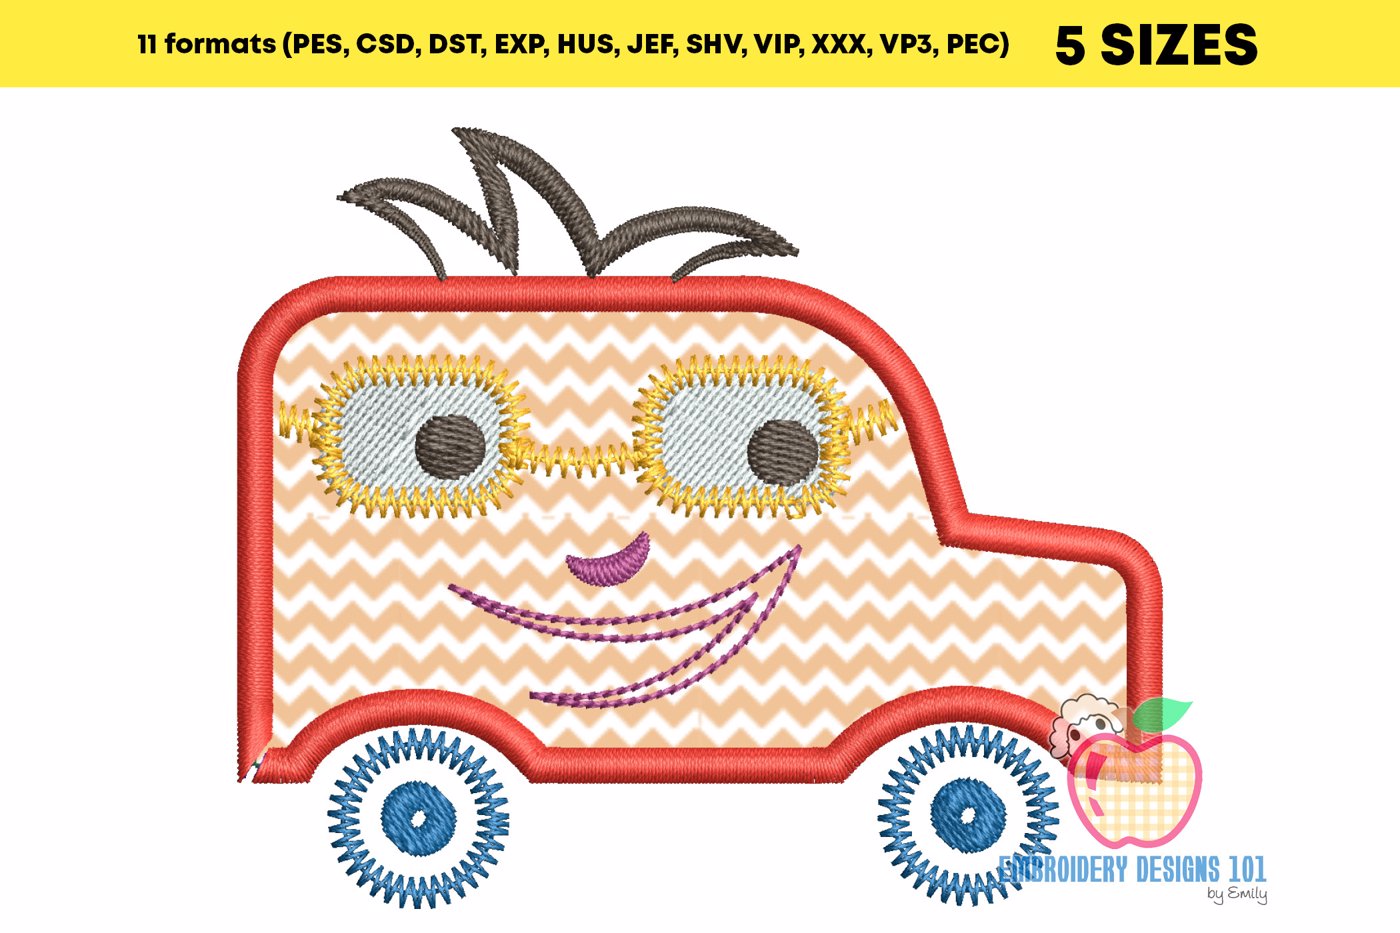 Cartoon Toy Van and Sunglasses Embroidery Design